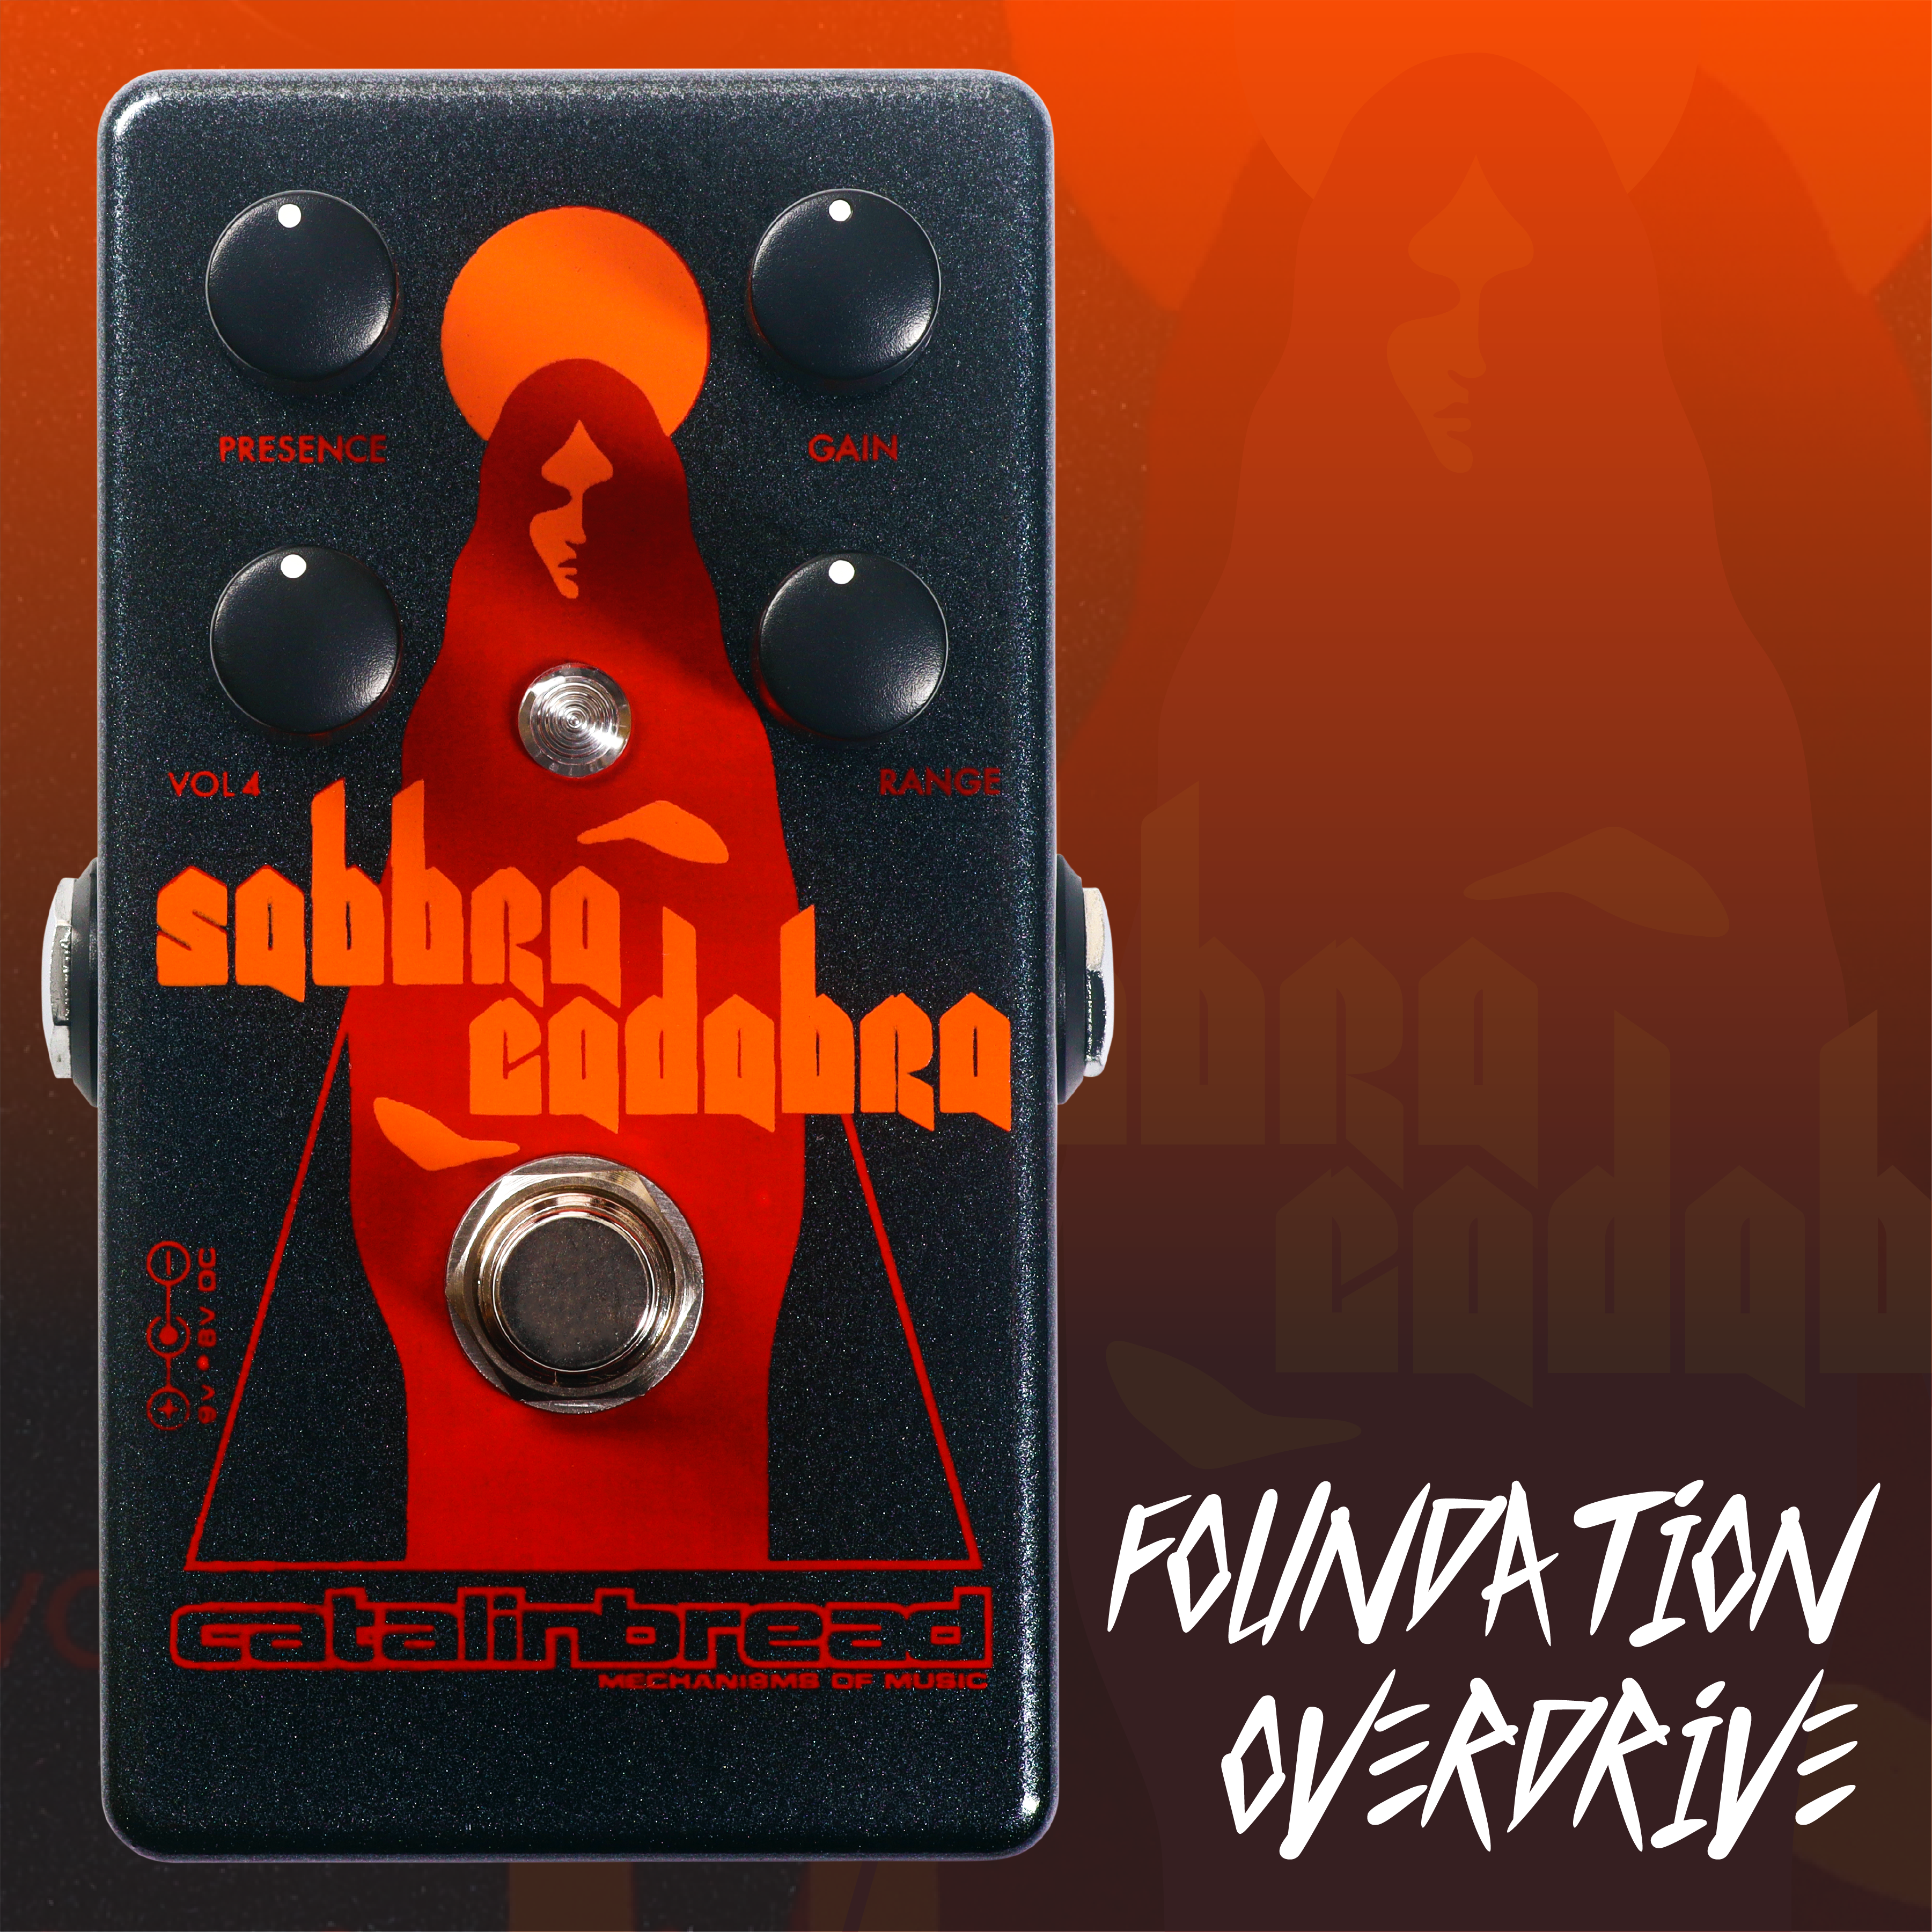 Foundation Overdrive Series